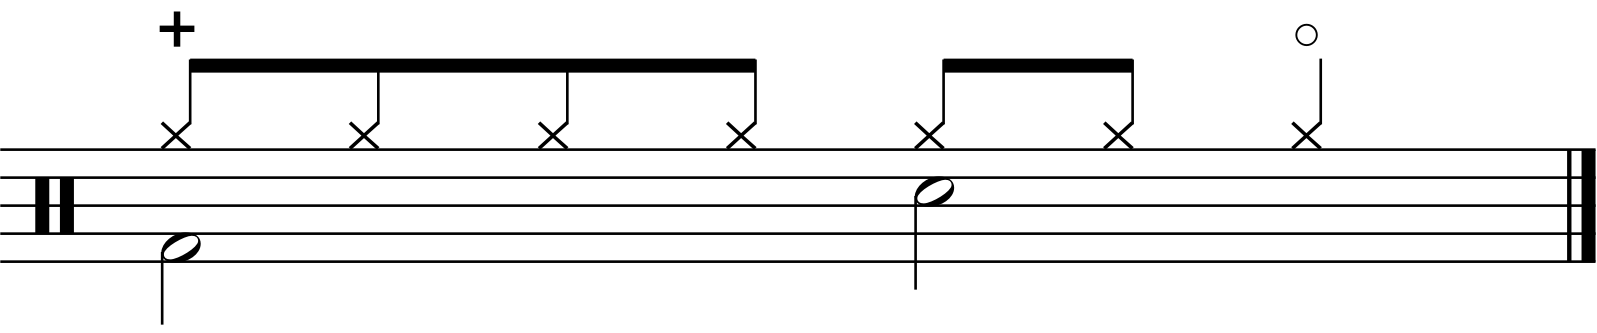 A half time groove with an open hi hat on count 4.